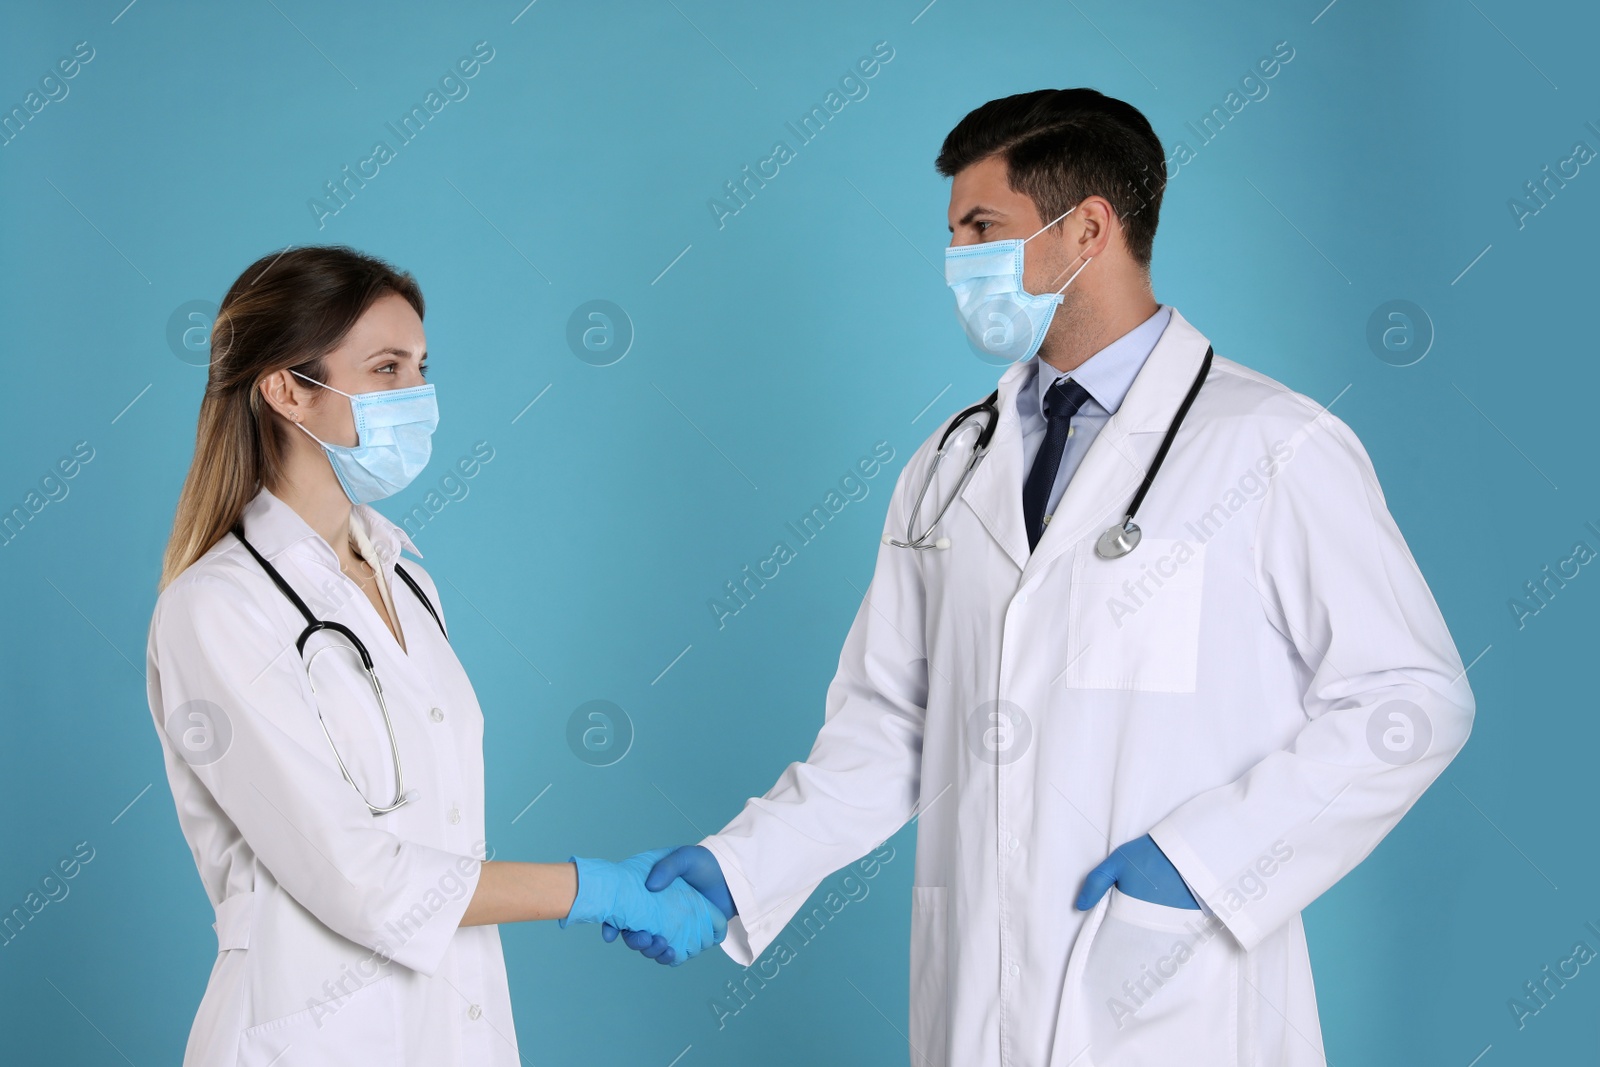 Photo of Doctors shaking hands on light blue background